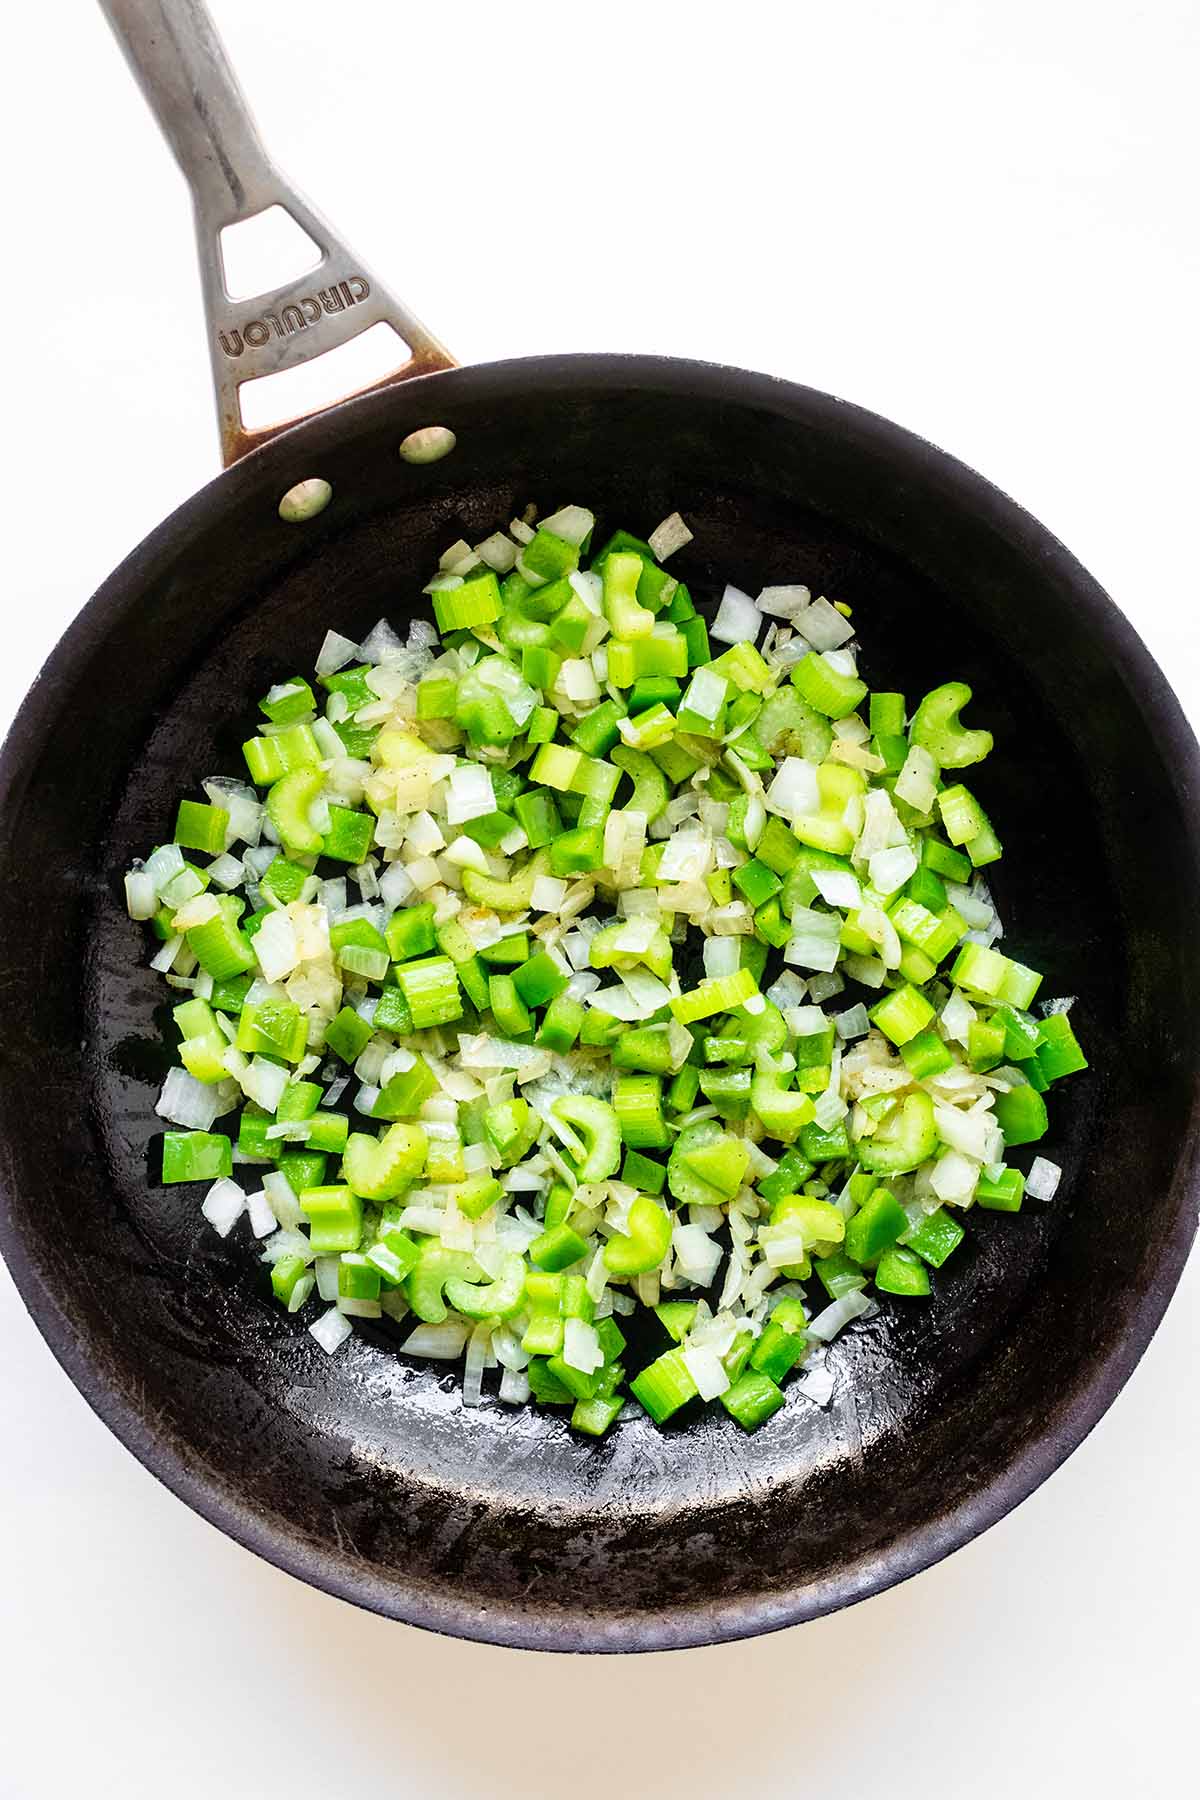 Chopped onion, bell pepper, and sliced celery in a skillet.